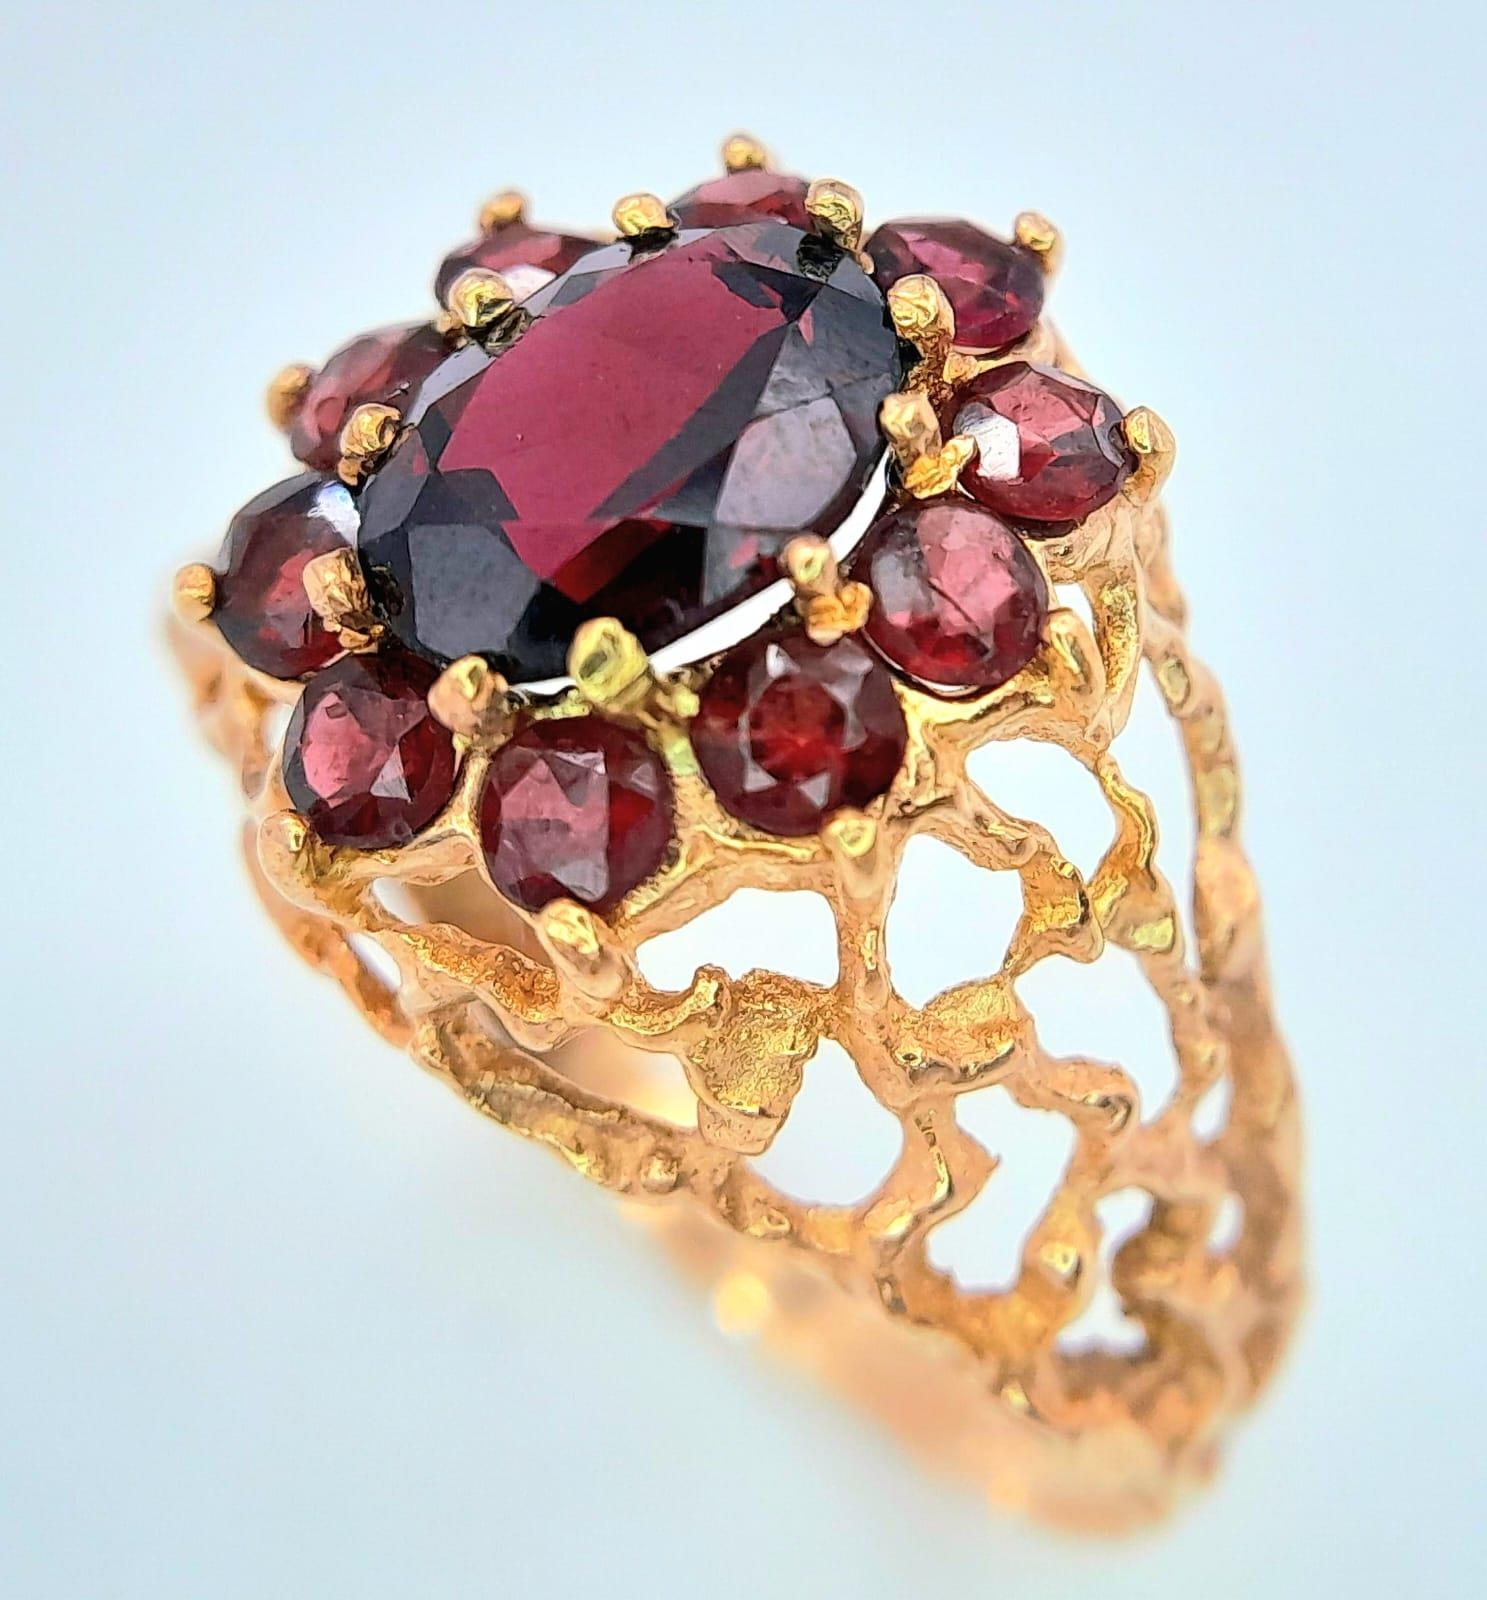 A vintage oval cluster garnet 9ct gold ring surrounded by a halo of bright red garnets in a - Image 2 of 6